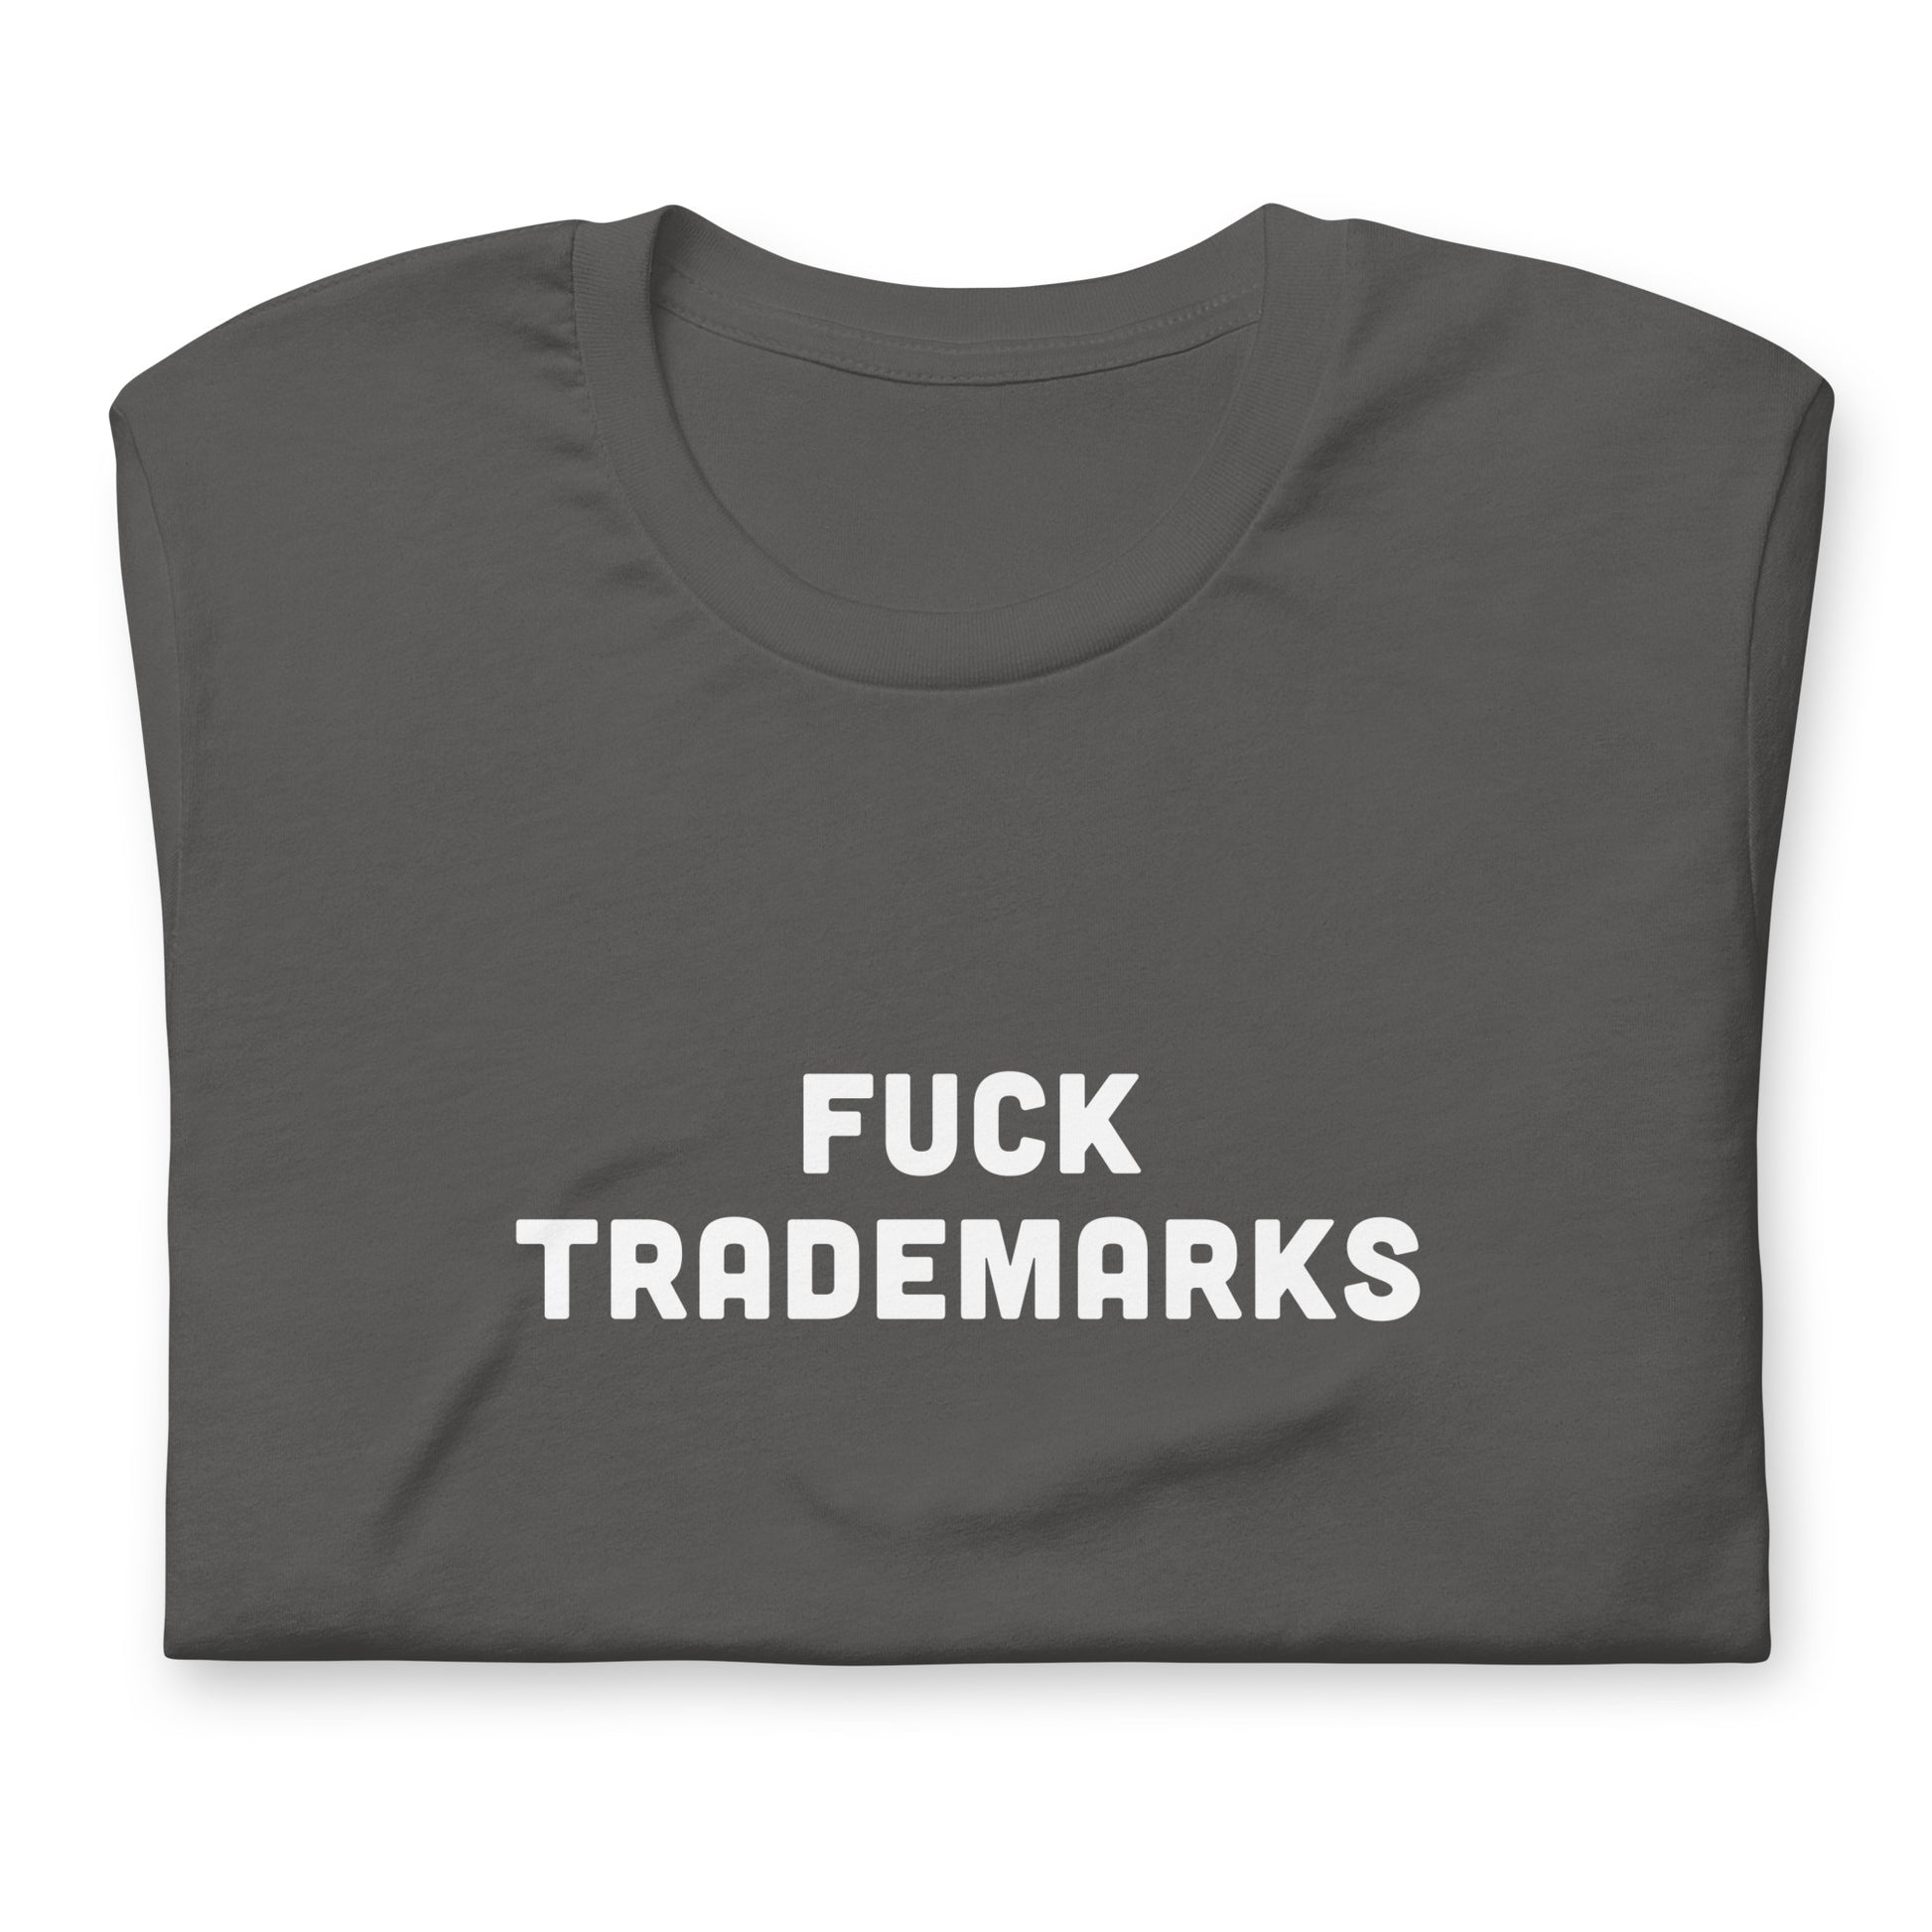 Fuck Trademarks T-Shirt Size XL Color Black